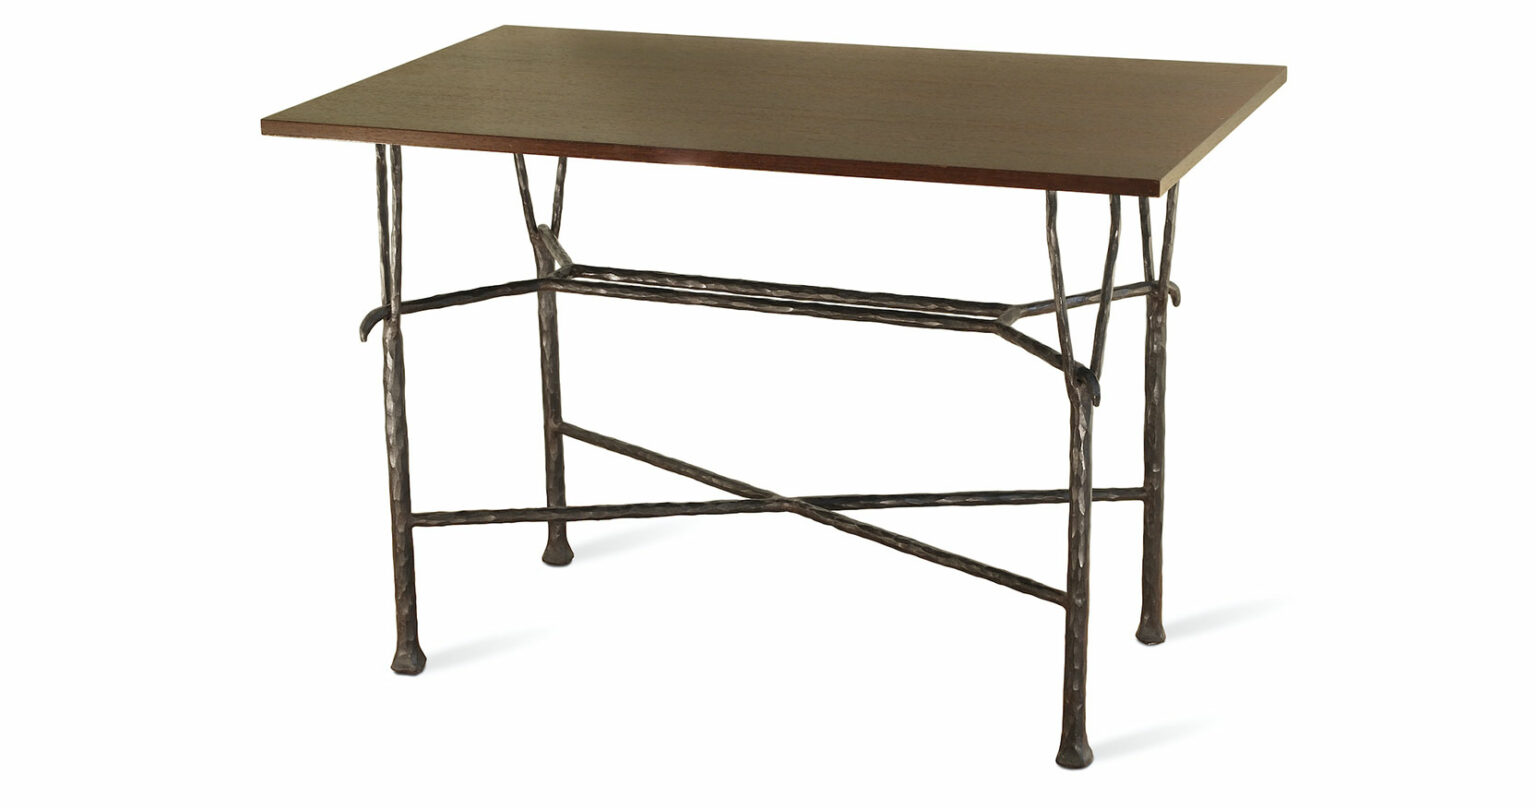 Garouste Bonetti, rectangular minimalist high table, dark wood top, black wrought iron legs that divide into two forks fixed under the top